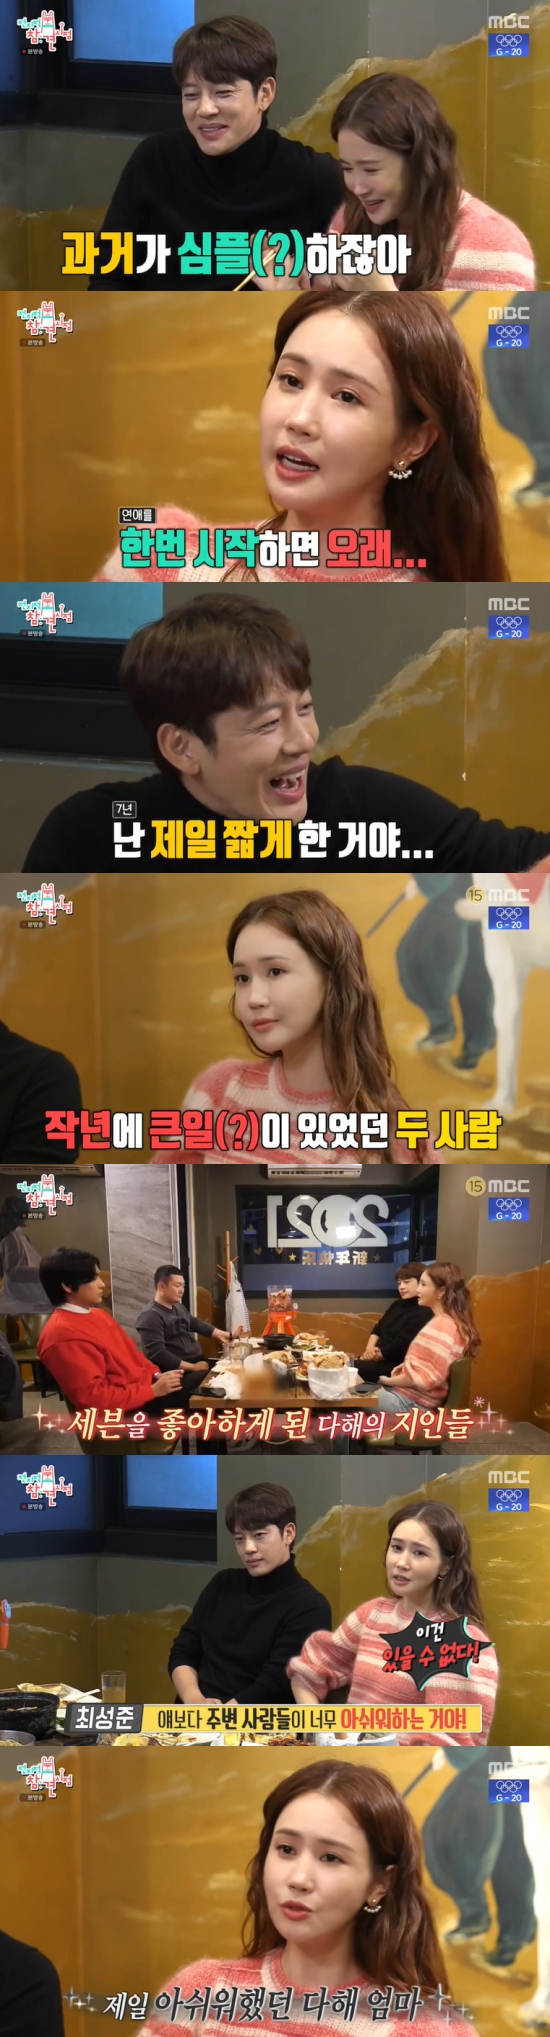 In MBC Point of Omniscient Interfere broadcasted on the 15th, Lee Da-hae and Seven appeared together.Lee Da-hae visited Lee Da-hae Manager and the restaurant on the day.Lee Da-hae invited Seven and Choi Sung-joon to the dinner party, and Lee Da-hae and Seven appeared for the first time on the air.Lee Da-hae said that he was able to get close to Seven because of Choi Sung-joon, who was close friends, and naturally Lee Da-hae and Sevens love story was released.Choi Sung-joon said, Did not you know both for a long time? I have never asked either of them.The present is important, but the past is simple, Lee Da-hae said.Seven was embarrassed, saying, Do not do it, and Lee Da-hae showed off his unsettling gesture, saying, If you start dating once, you will do it long.Seven said, Dahae was born and said it was the longest love. It was the longest for two or three years, and I said, This is the shortest thing.Choi Sung-joon also said, I was proud of this place, but did not there be a big event in A Year Ago in Winter? Lee Da-hae and Seven said that they had a crisis of separation.Lee Da-hae said: There was something like that: after a long time we met, my friends, my sisters and my brothers became so pretty, there were too many people crying (when they almost broke up).I can not have this. Even my aunt cried. My mother was so sorry that my neighbors cried and especially I was most sorry. Lee Da-hae said, My mother was not pretty from the beginning. She is my mother. I have suffered a little trouble. I like it.Lee Da-hae said, But a month after I met, (Seven) kept saying, I miss my mother, and my mother said, Lets meet in a little while.(Seven) said he wanted to actively go out and buy a gift for Mothers Day. Lee Da-hae said, I was angry to see my mother once, and my mother was getting older and she did a little treatment, so she said she was not seeing it.I told the story (to Seven): I thought we could meet with sunglasses, he added.Lee Da-hae said: My mom gave up and came home and I bought fruit full of both hands. My mom cooked me food.I just ate brightly, The food is so delicious. Then she said, What is it about paper? And she said, What is it?I think I have a son-like mind. Choi Sung-joon praised Dong-wook as a really cool person and a family love even if you look at it for your family. Lee Da-hae said, I think there is a driving force for this person to go long.I am not a large family, but this is a very large family. Lee Da-hae said: I met (Seven) families and theyre so good, my sisters are so good, but my parents are the best.Even when we were in trouble, we were so sorry for our family that we could not cry and cry. I did not think I could meet too good people.I think I can meet this man. Photo = MBC Broadcasting Screen